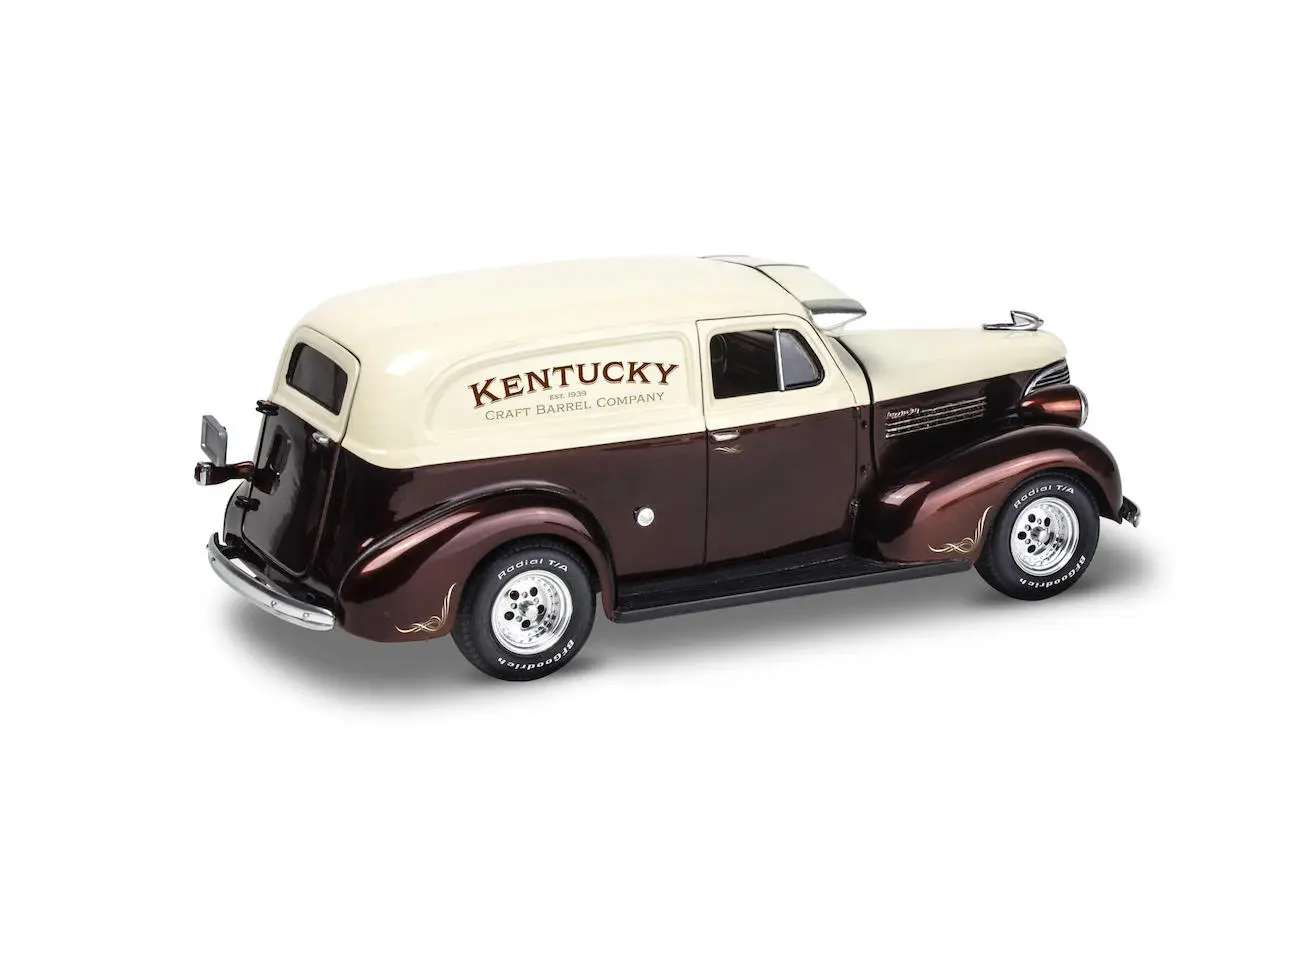 Revell 14529 - 1939 Chevy Sedan Delivery